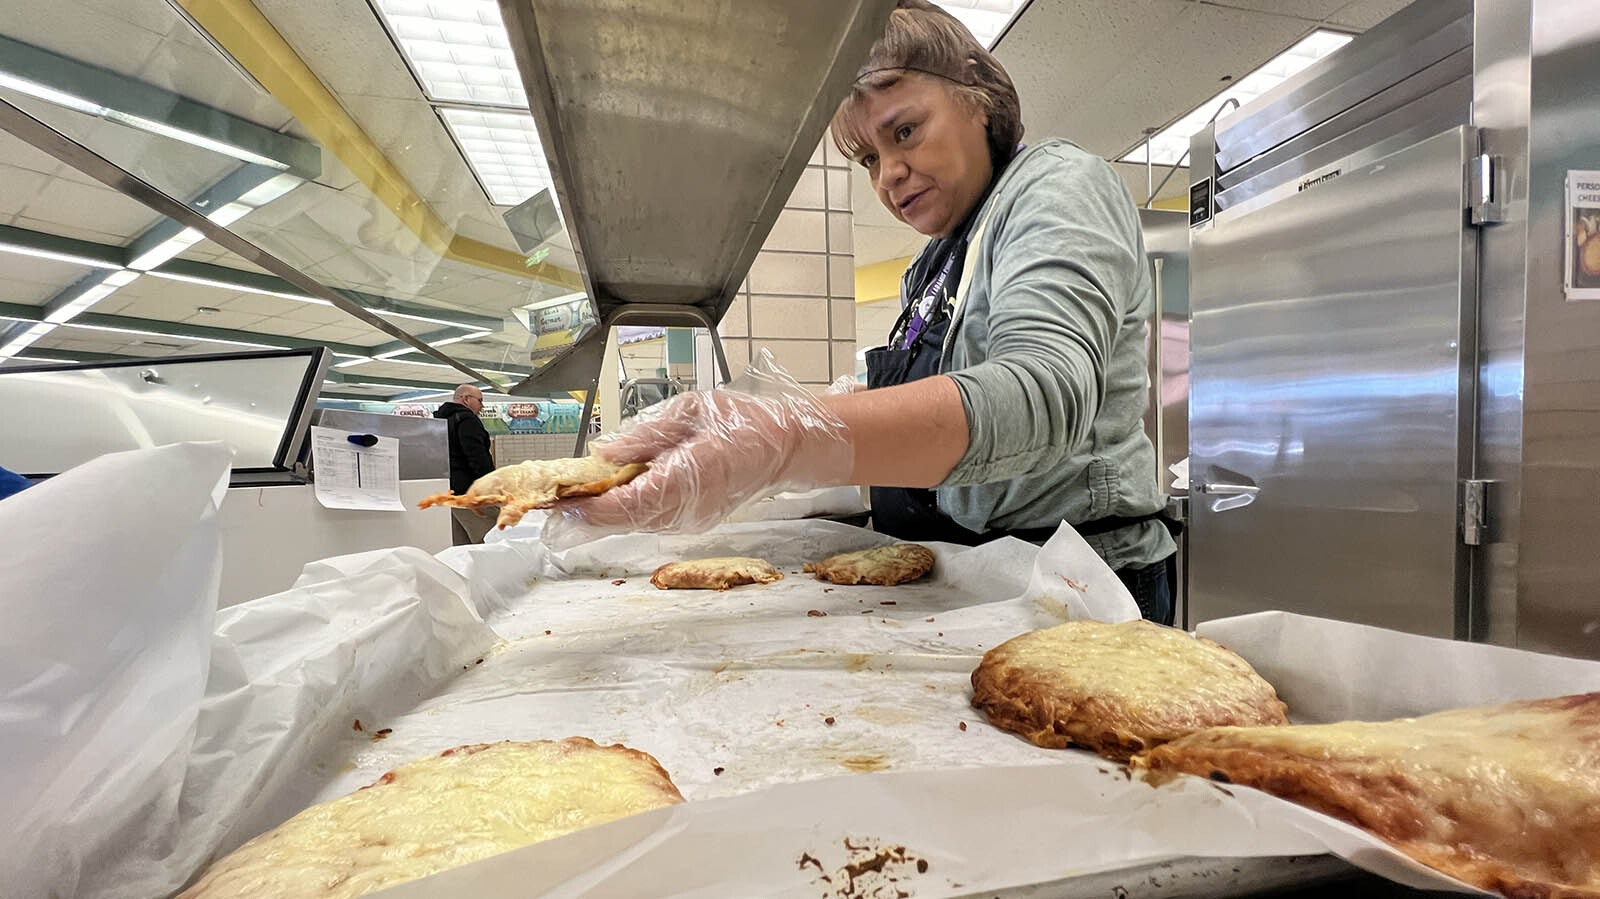 Frances Vigil reaches through the severing line to dish out homemade pizza at Arp Elementary School in Cheyenne.